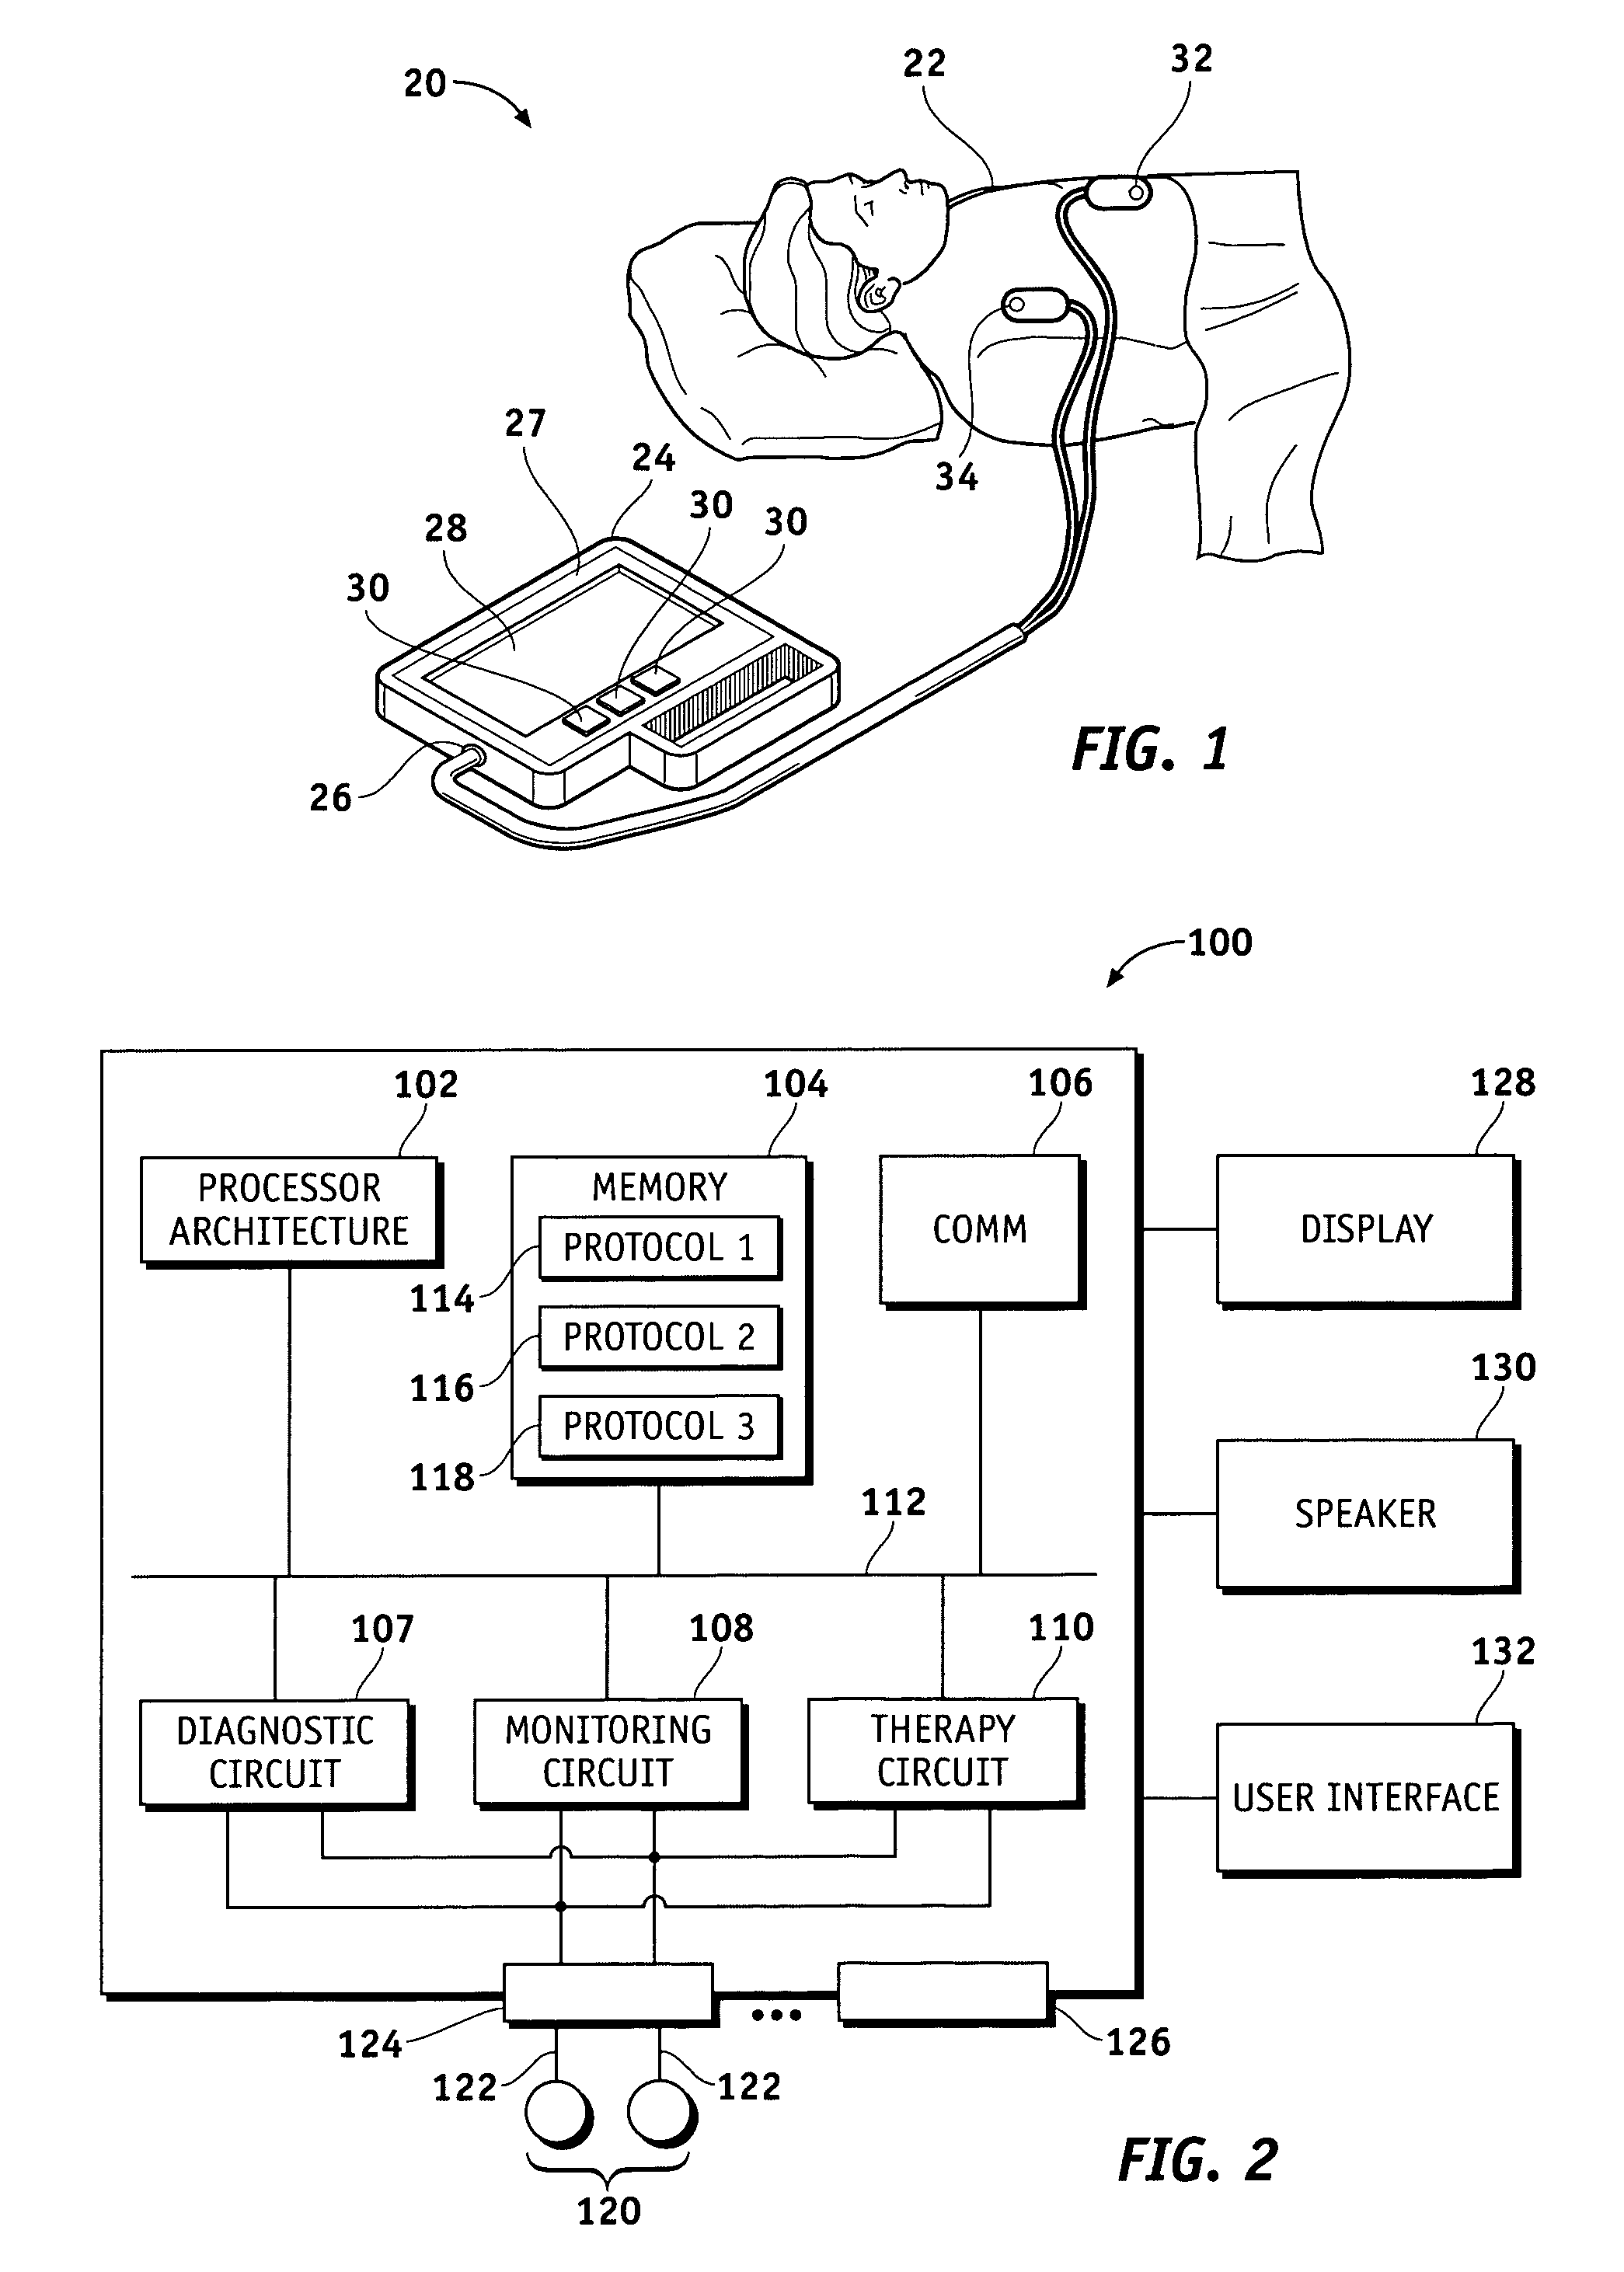 System and method for using diagnostic pulses in connection with defibrillation therapy